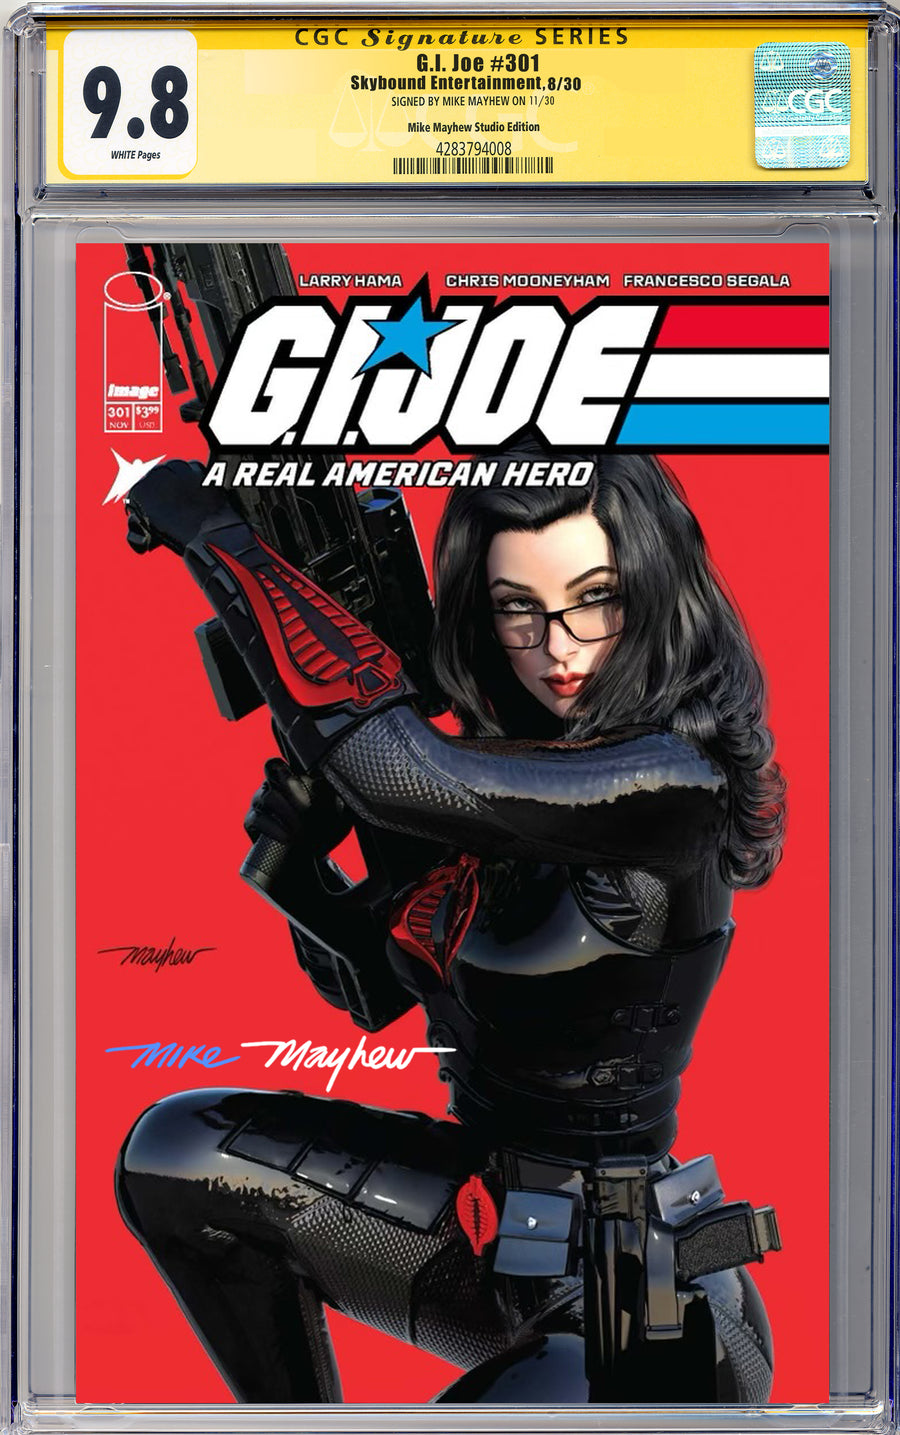 G.I. JOE: A REAL AMERICAN HERO #301 Mike Mayhew Studio Variant Cover A Trade Dress Full Duo Sig CGC Yellow Label 9.6 and Above Graded Slab